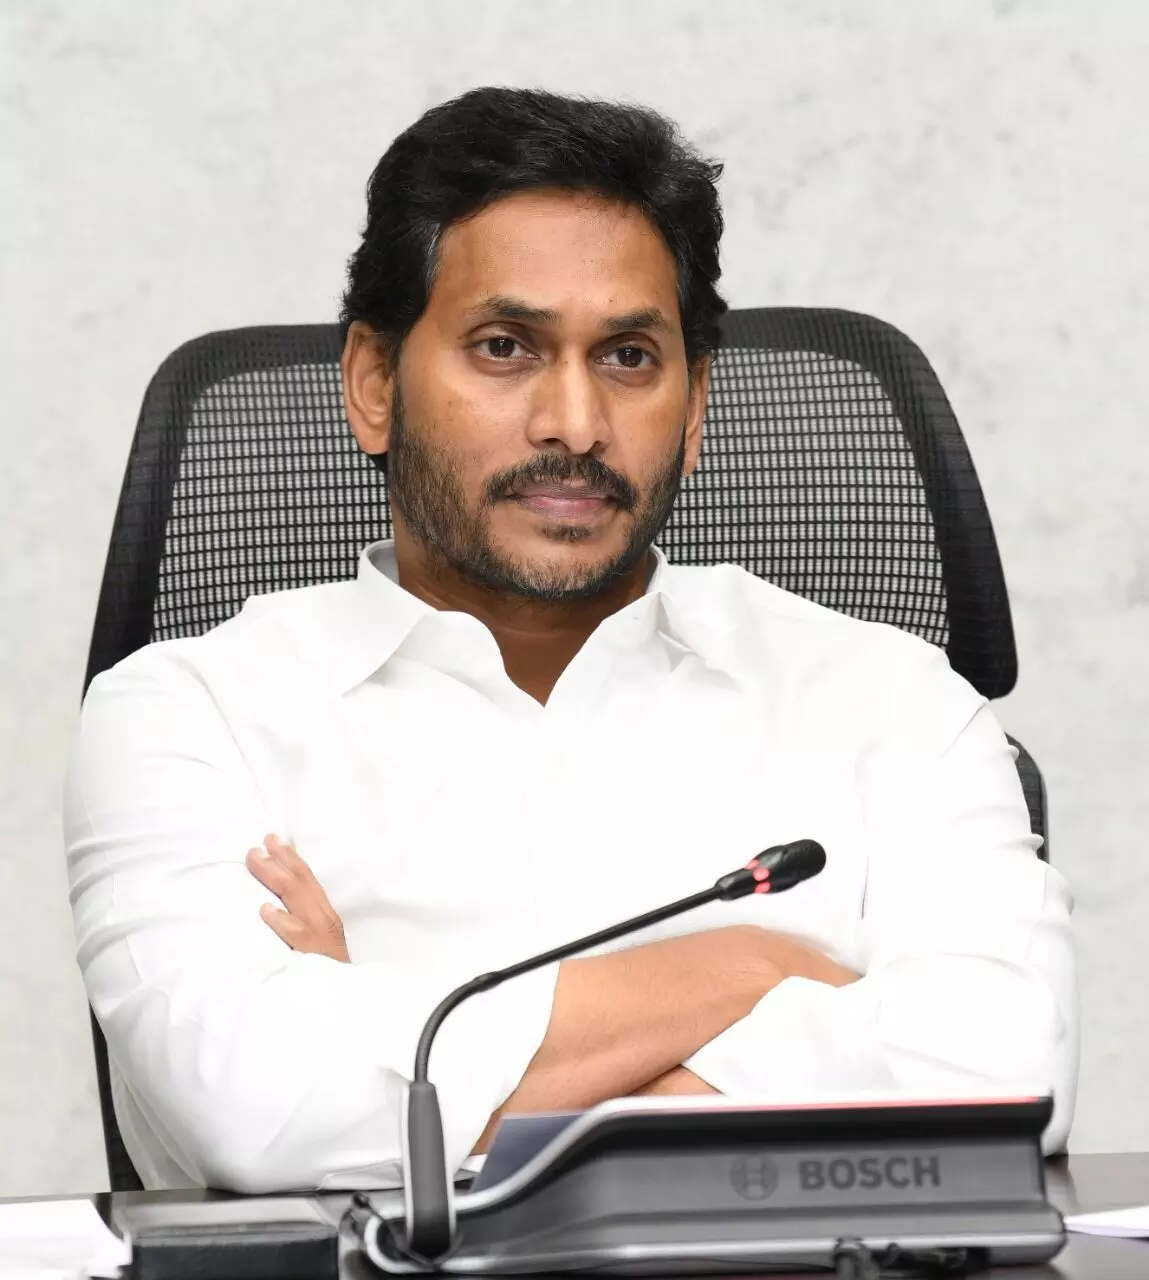 Odisha train accident: YS Jagan announces ex gratia of Rs 10 lakh each to kin of deceased